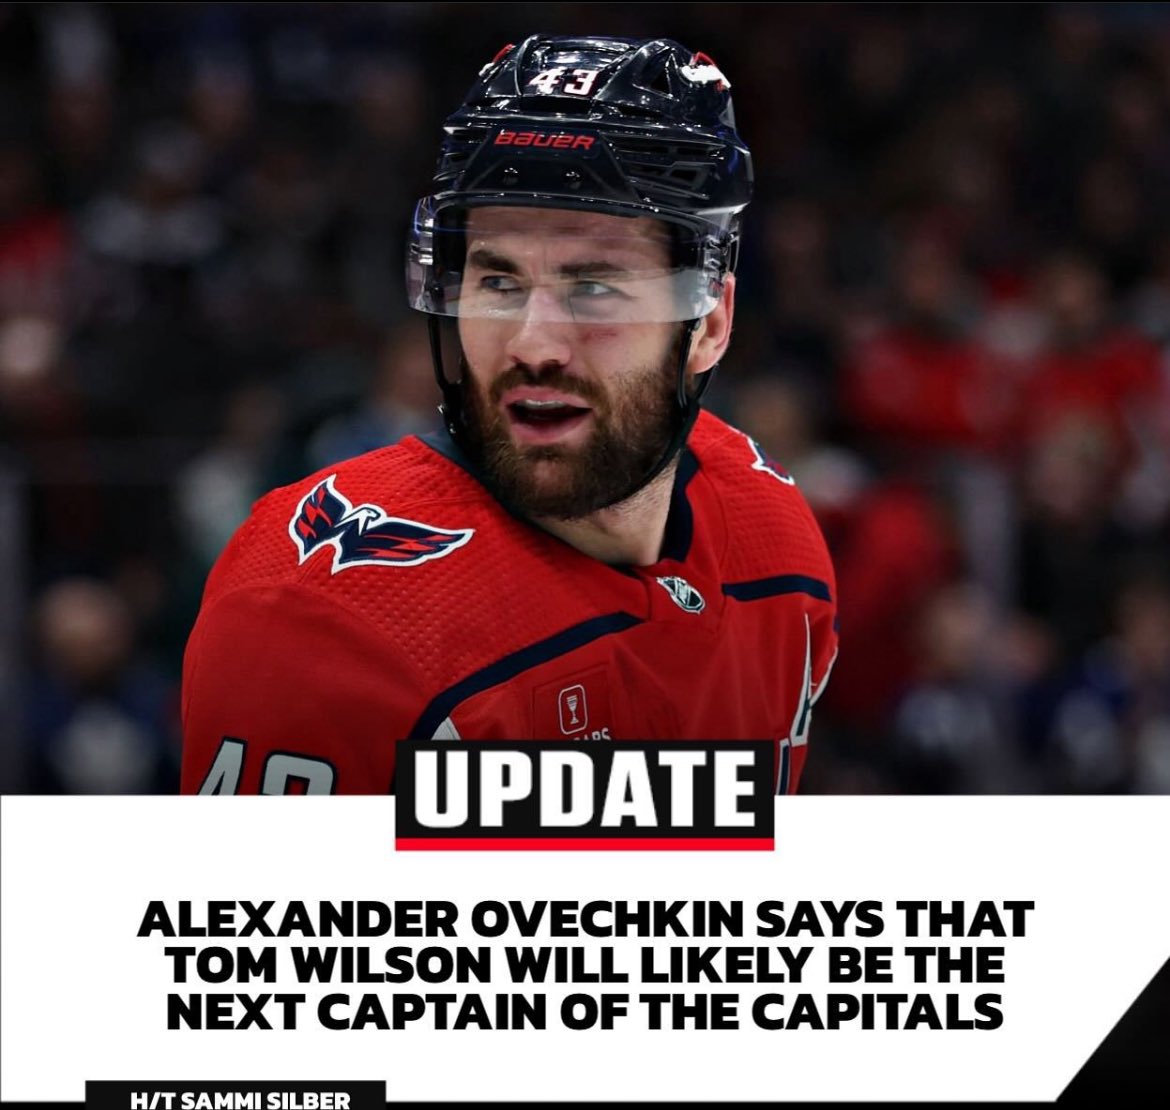 Yall have fun with that #ALLCAPS